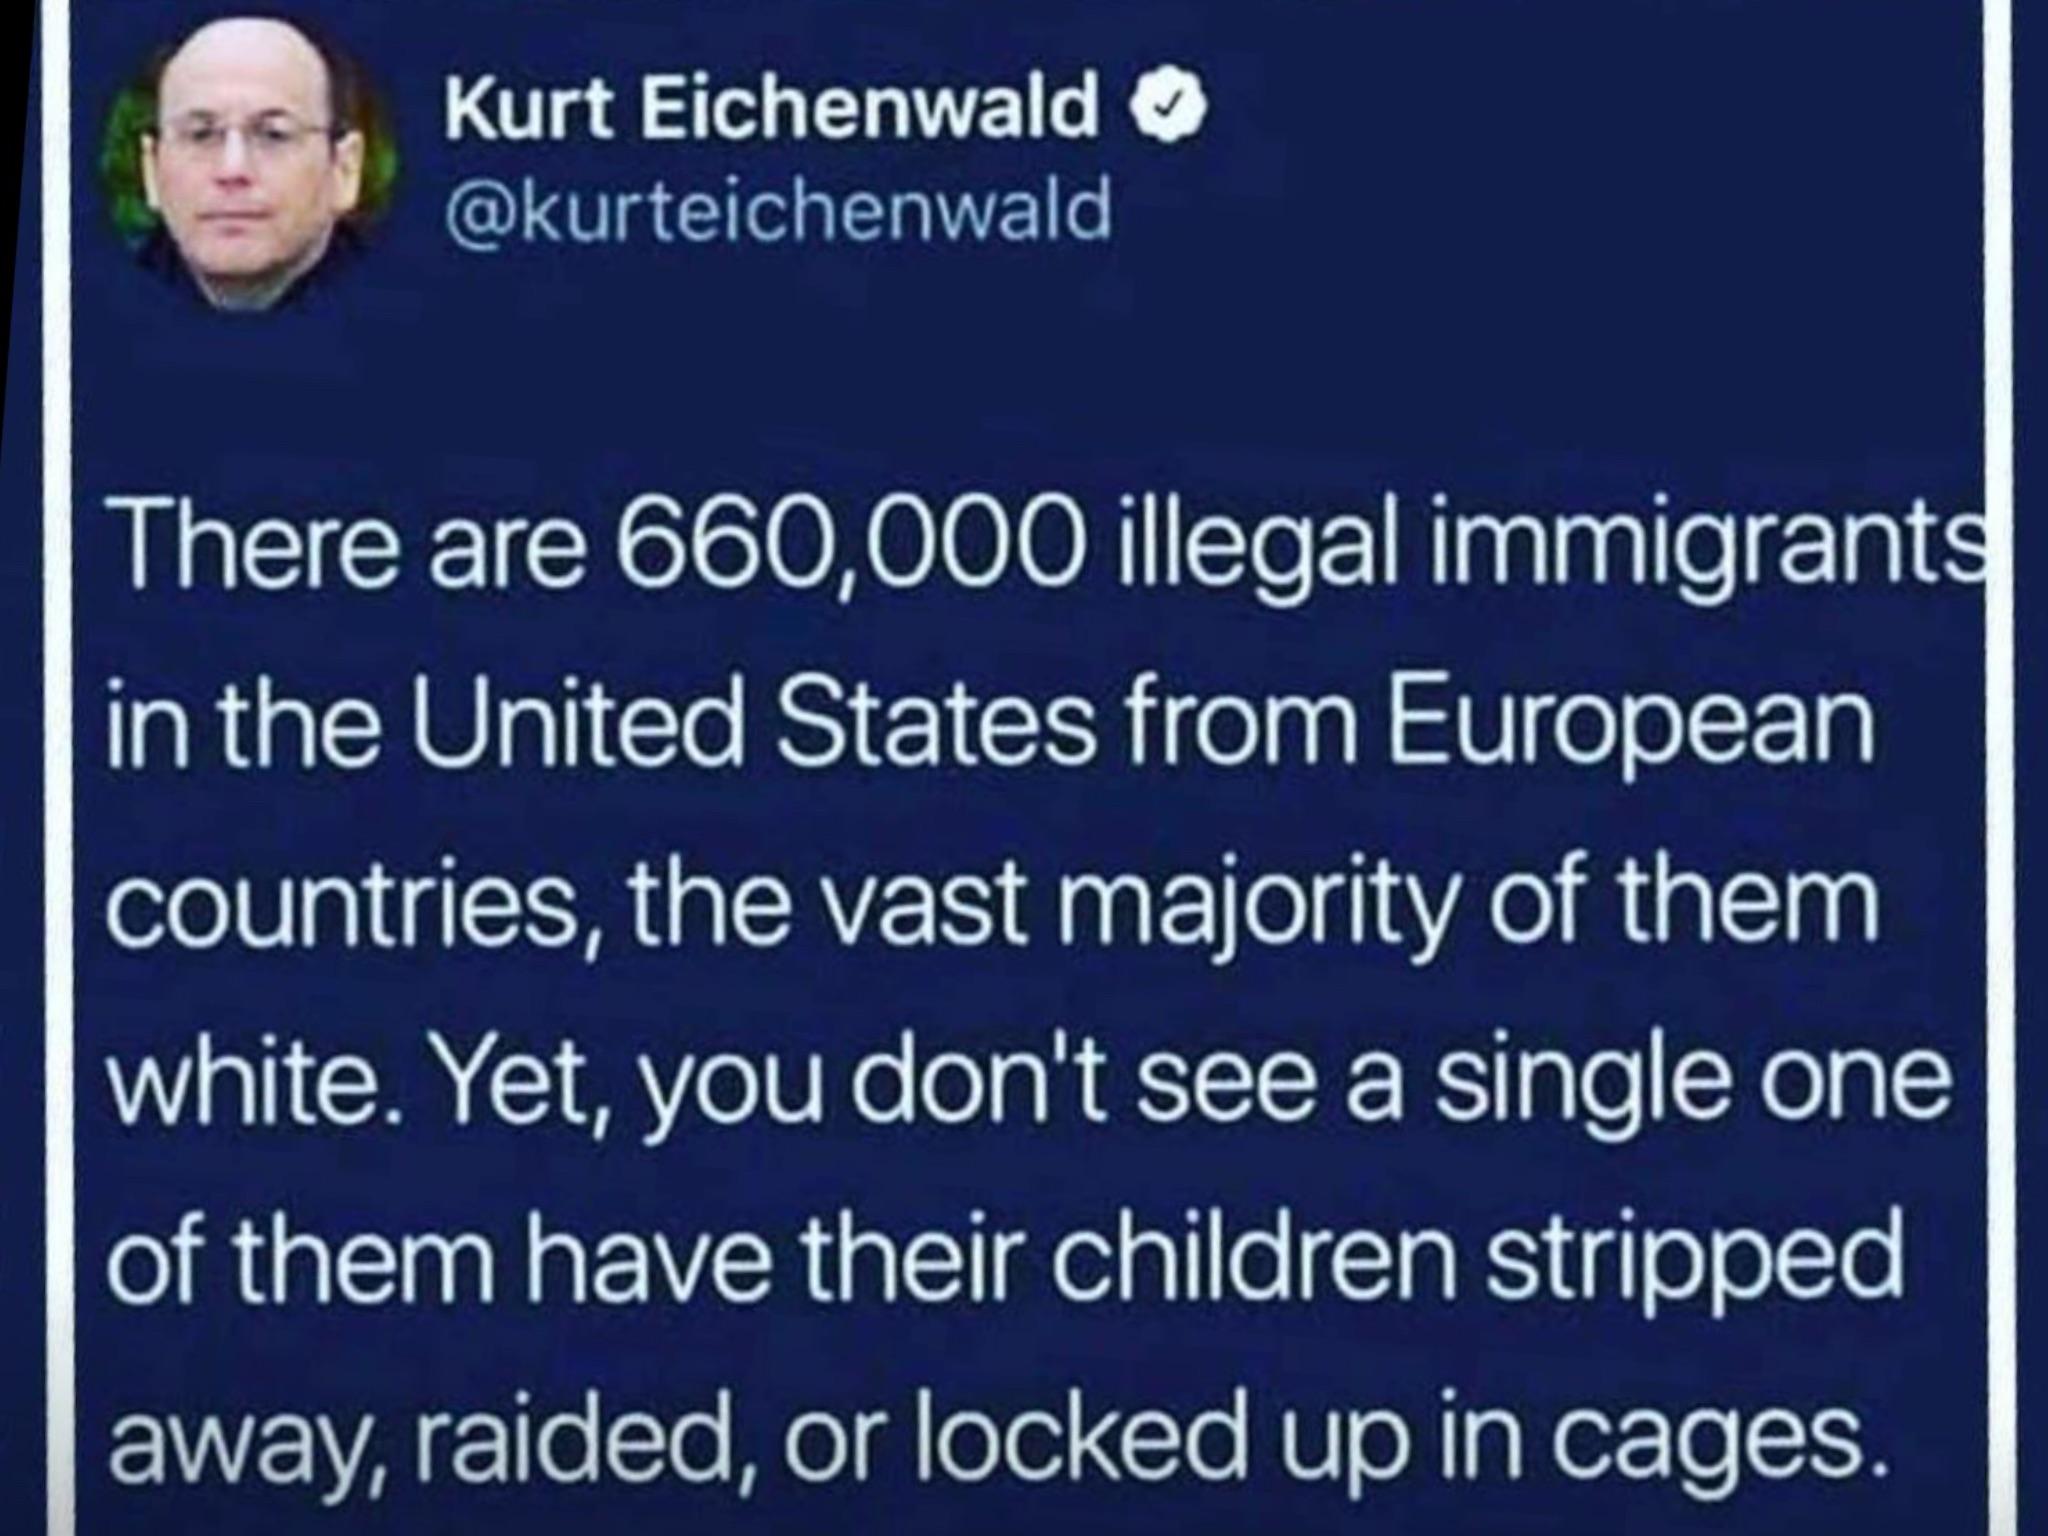 atmosphere - Kurt Eichenwald There are 660,000 illegal immigrants in the United States from European countries, the vast majority of them white. Yet, you don't see a single one of them have their children stripped away, raided, or locked up in cages.